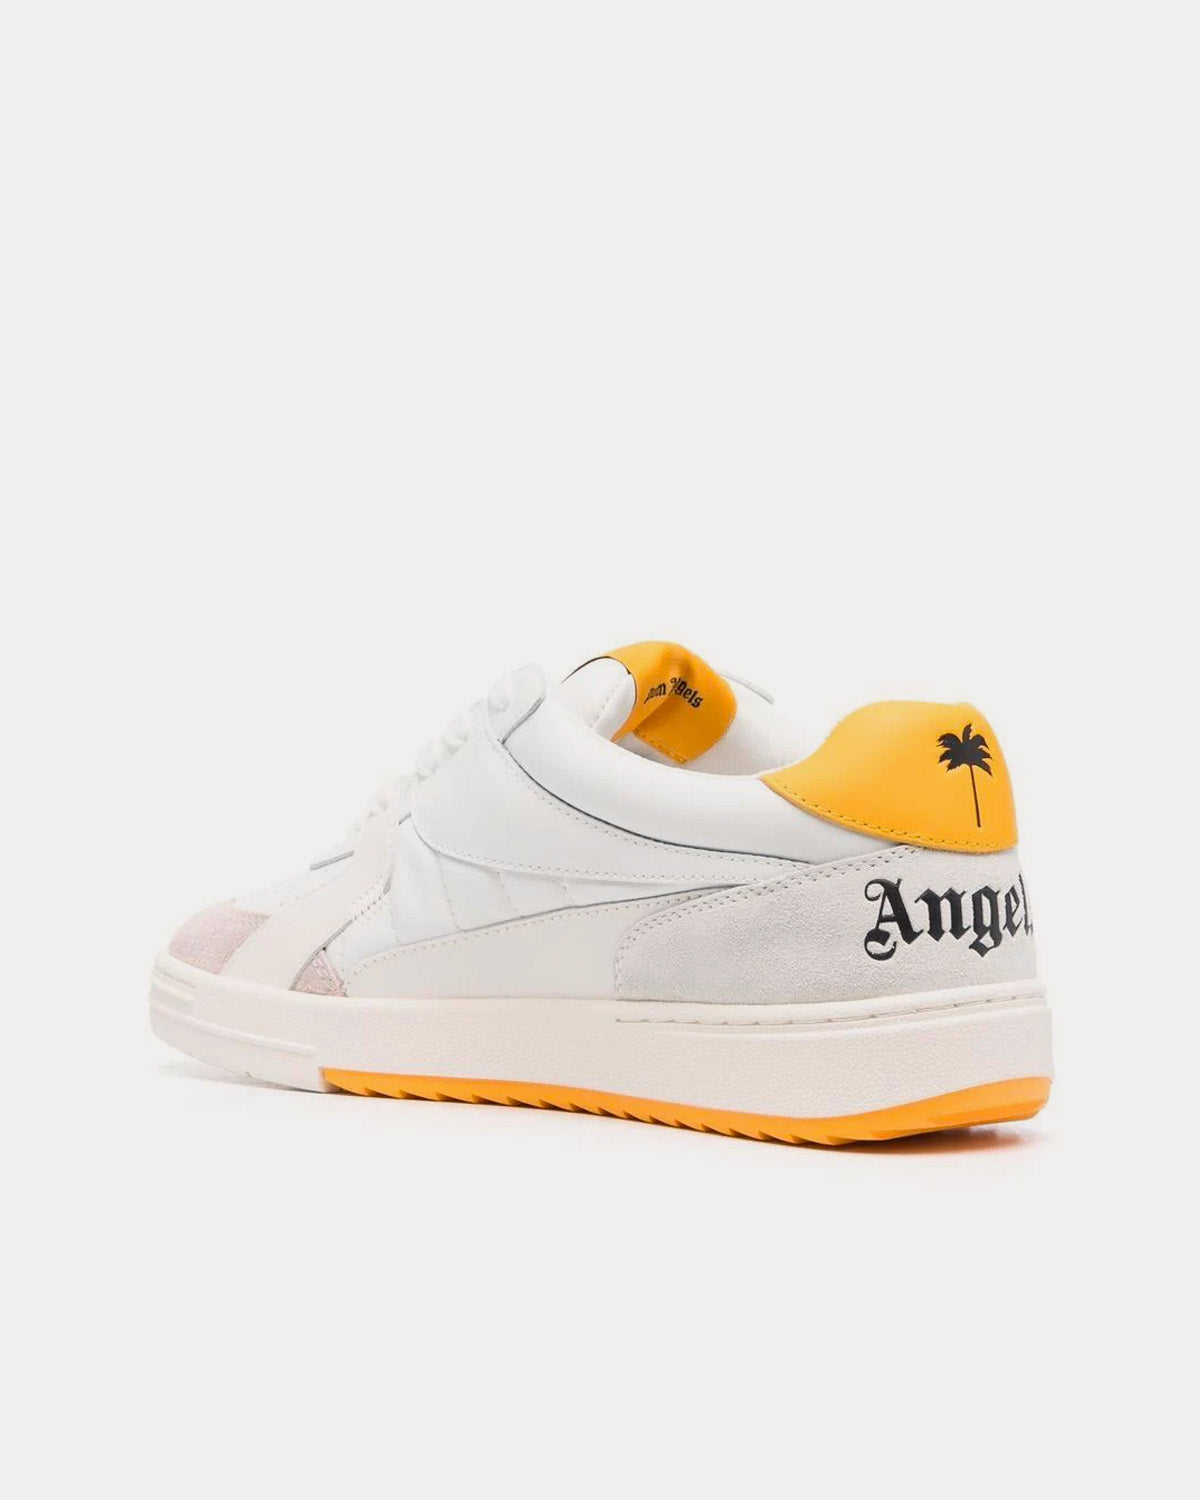 Palm Angels - University White / Yellow Low Top Sneakers